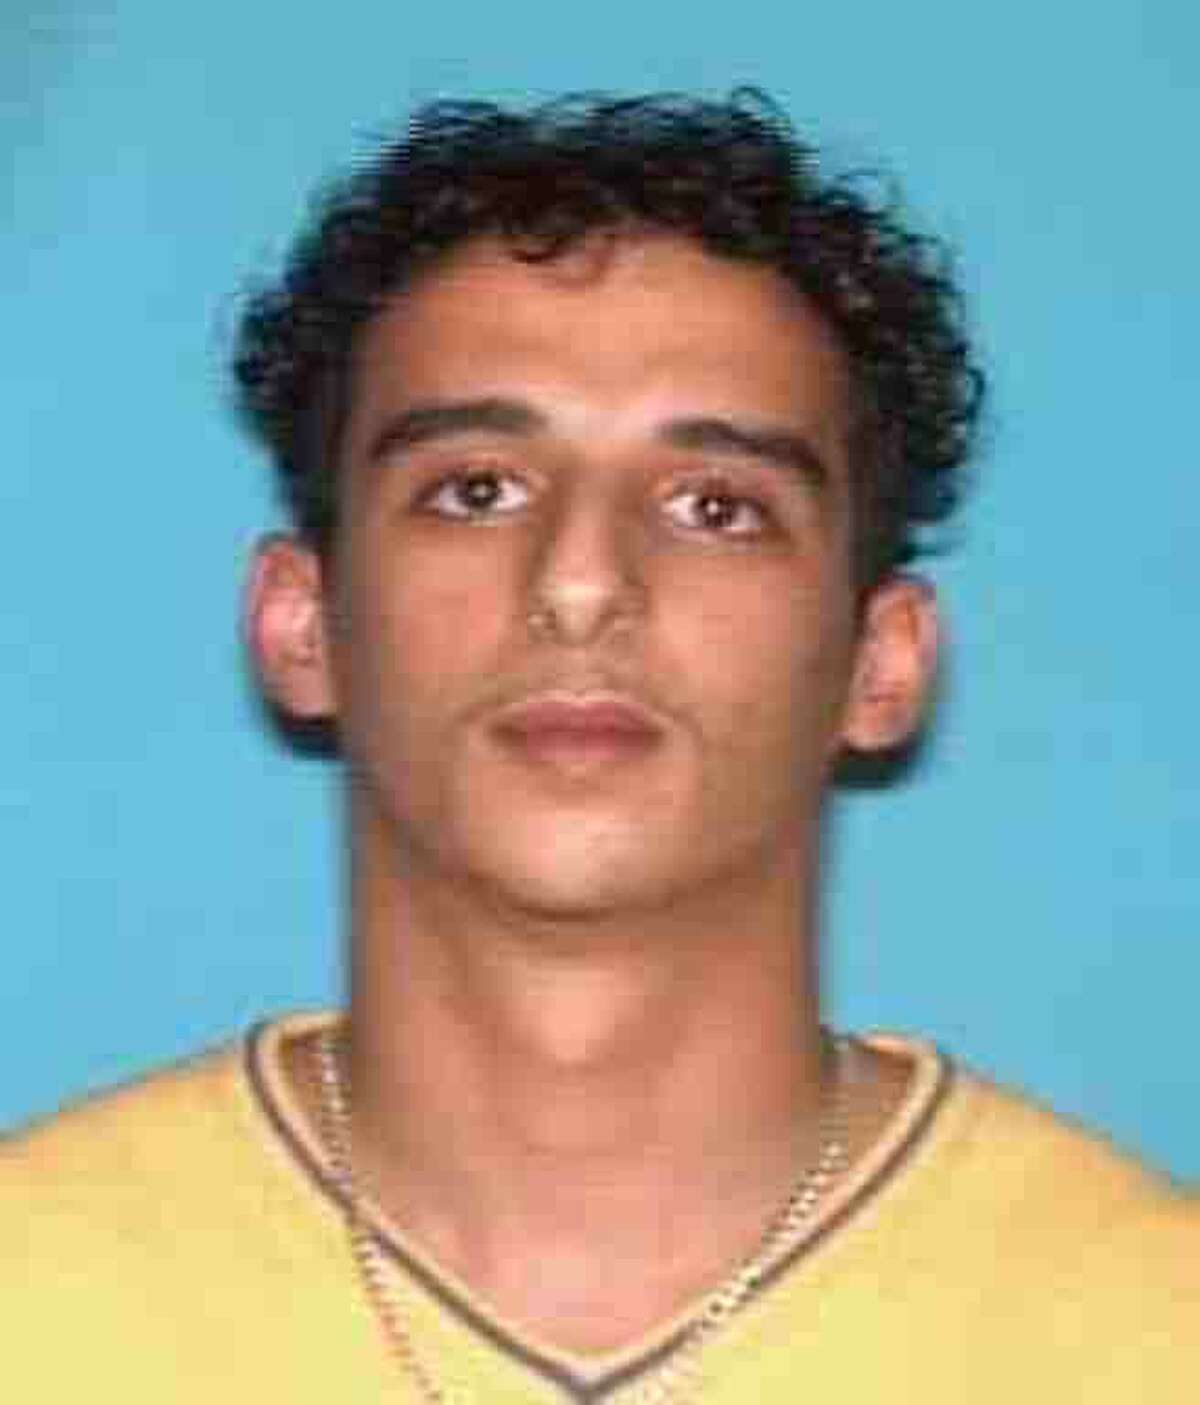 Marwan M. Saeed, 31, is wanted for murder in a December 2007 case. During a robbery in Weston Lakes, a female homeowner was killed. He is 5 feet 7 inches tall and weighs 150 pounds. He is believed to have fled the country. Call Fort Bend County Crime Stoppers anonymously at 281-342-8477.